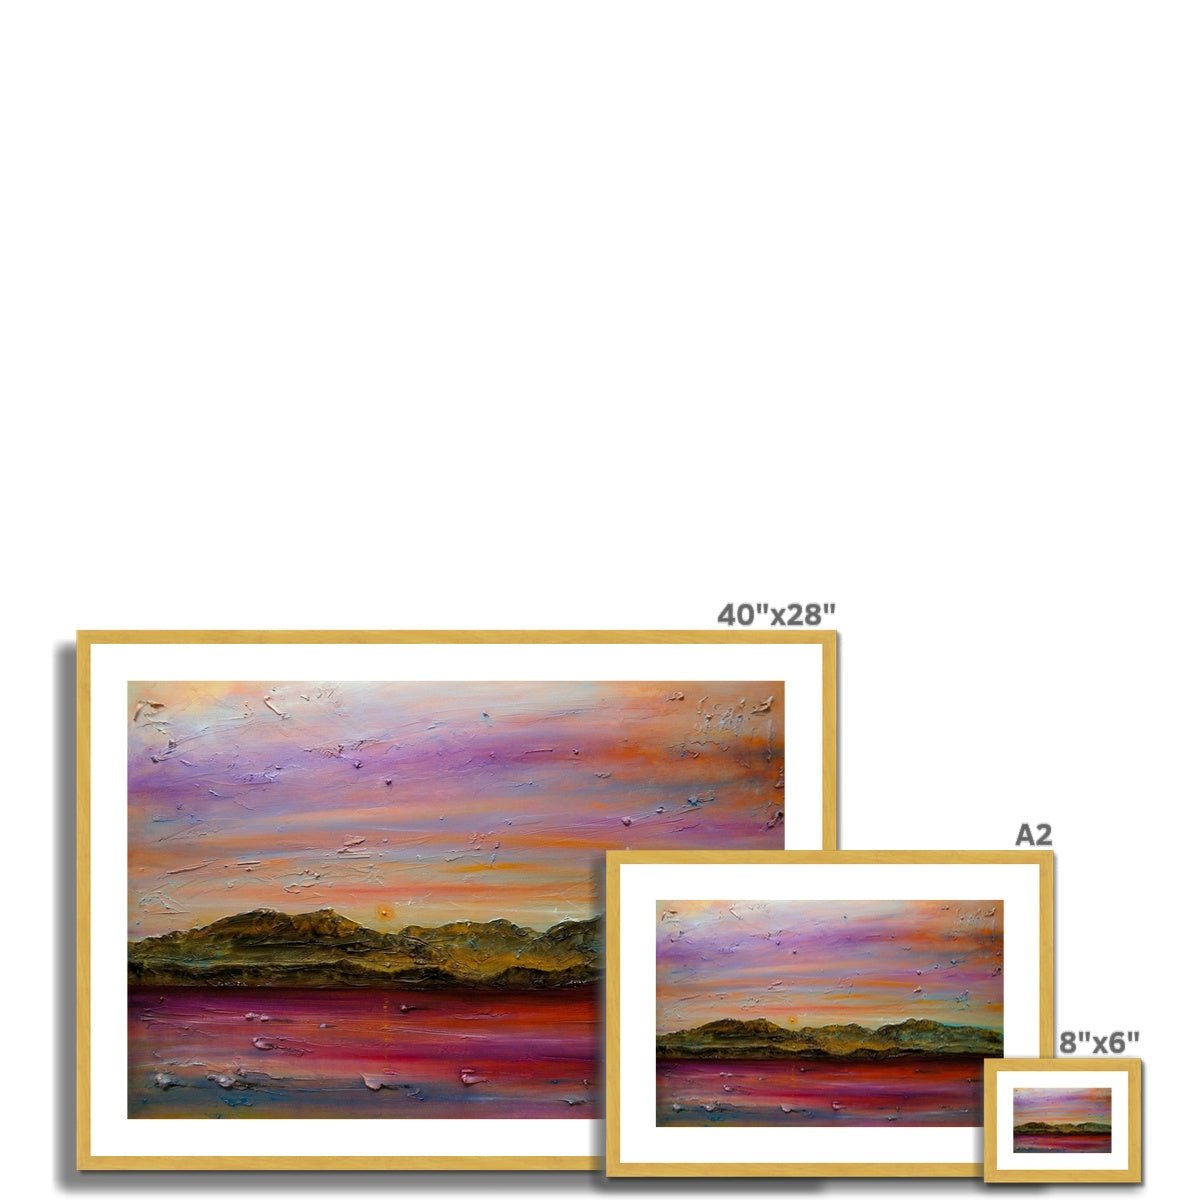 Arran Autumn Dusk Painting | Antique Framed & Mounted Prints From Scotland-Antique Framed & Mounted Prints-Arran Art Gallery-Paintings, Prints, Homeware, Art Gifts From Scotland By Scottish Artist Kevin Hunter